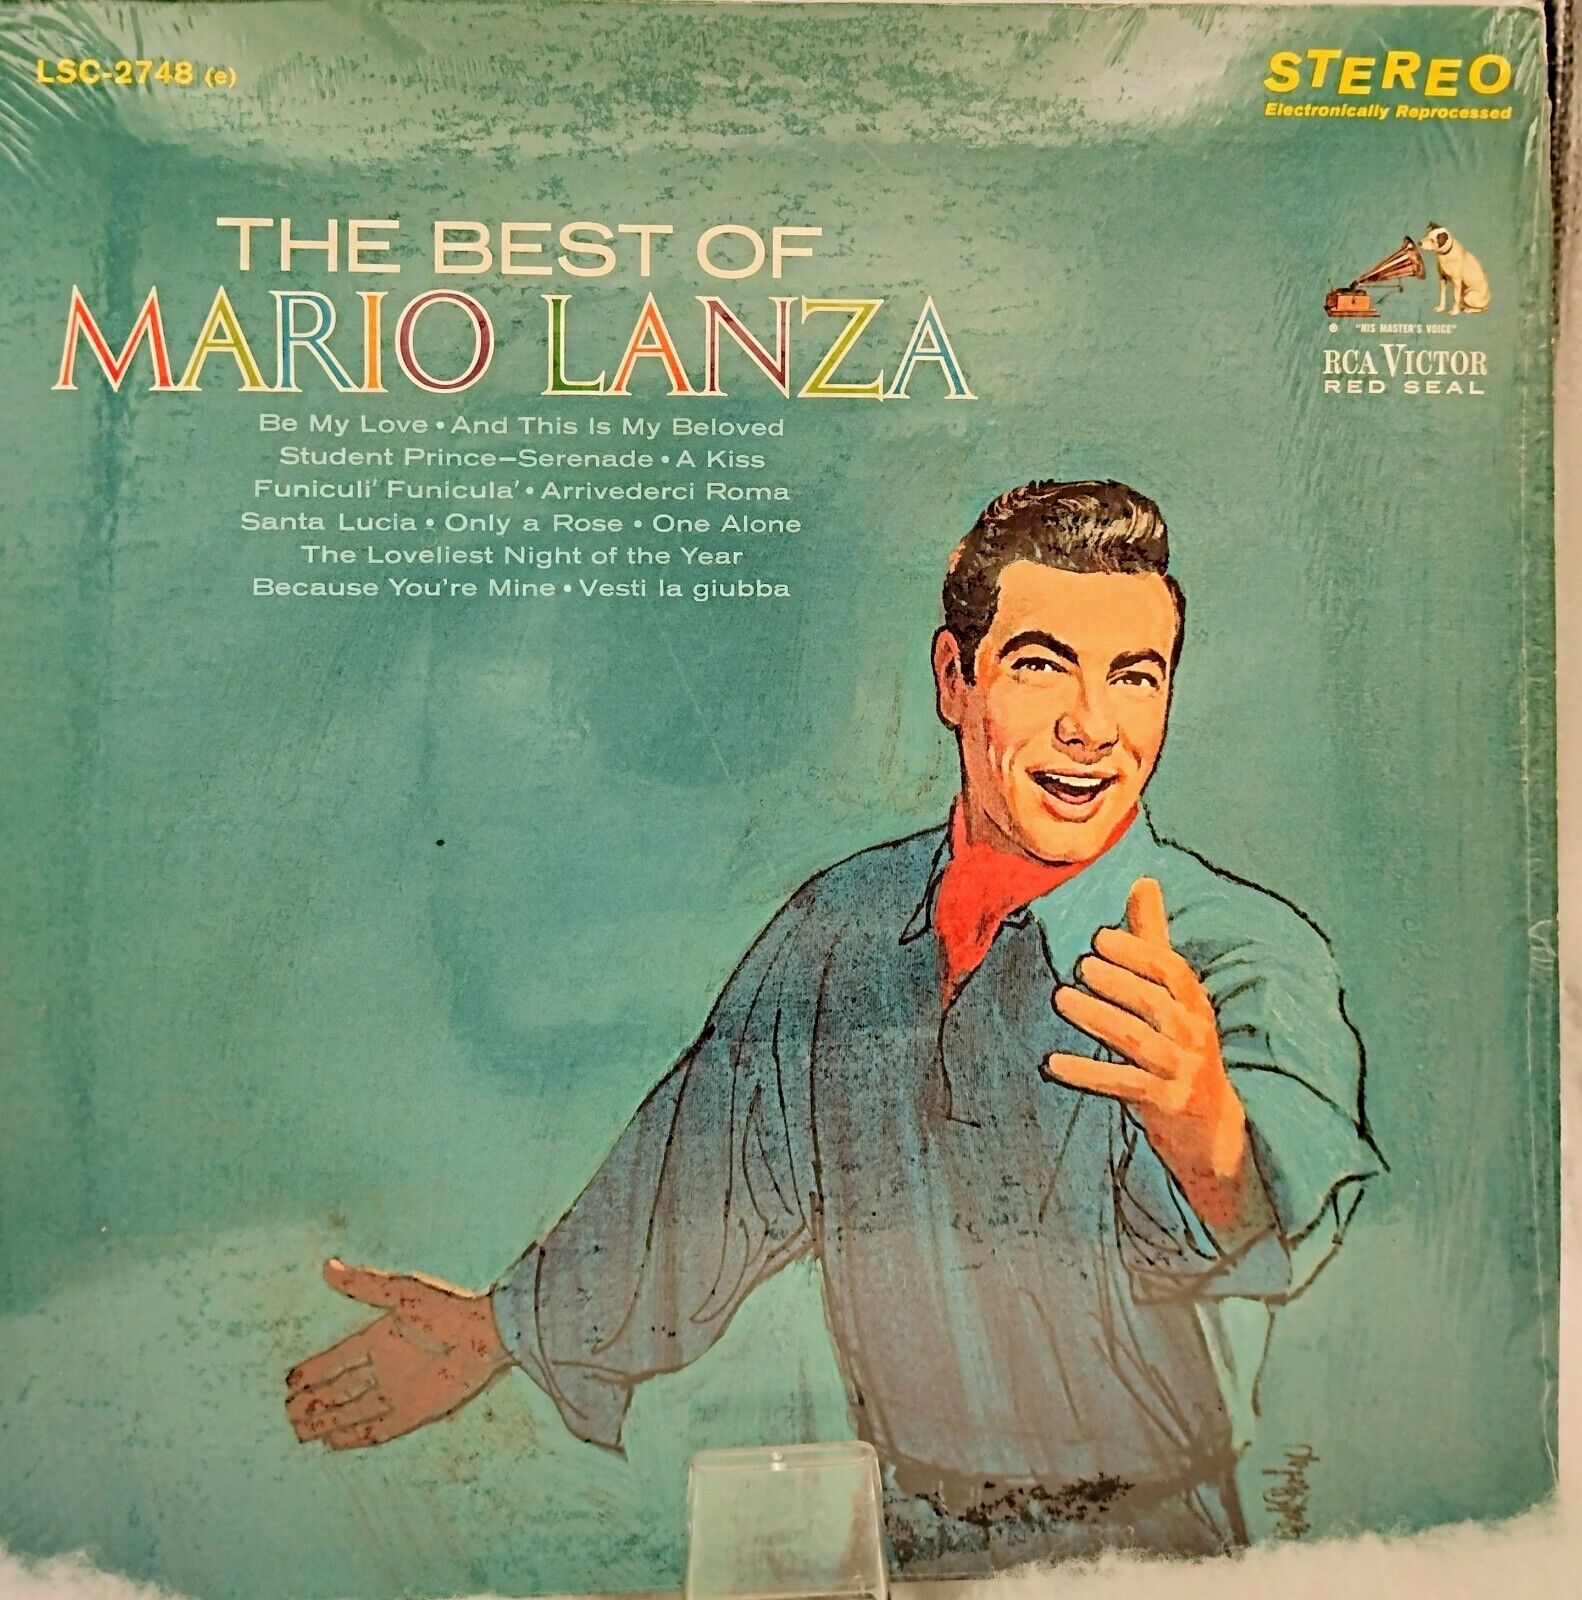 Vtg, RARE The Best of Mario Lanza 1964 RCA Vinyl LP Exc to Near Mint Condition